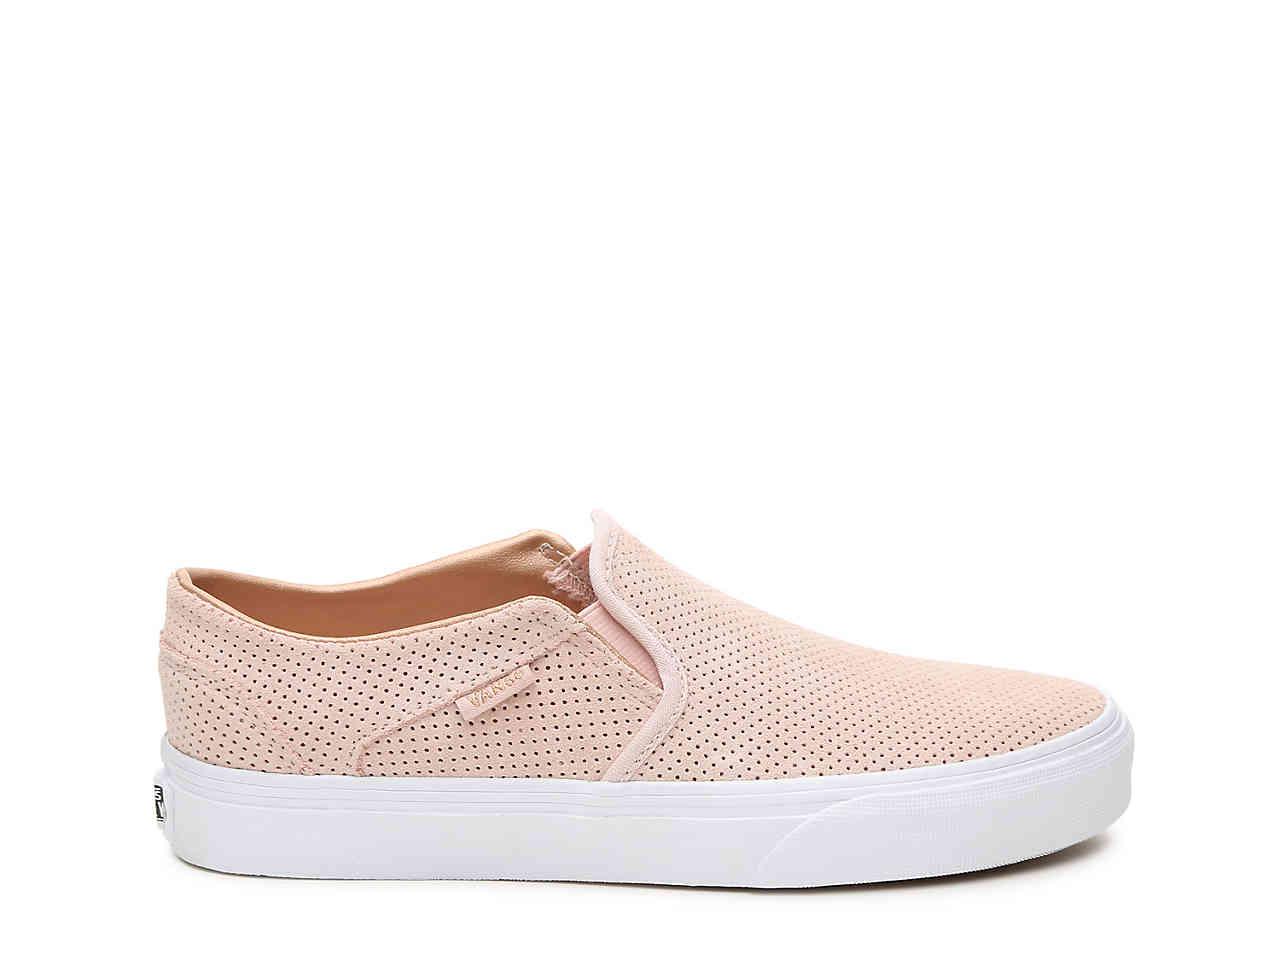 Vans Asher Perforated Slip-on Sneaker in Pink | Lyst